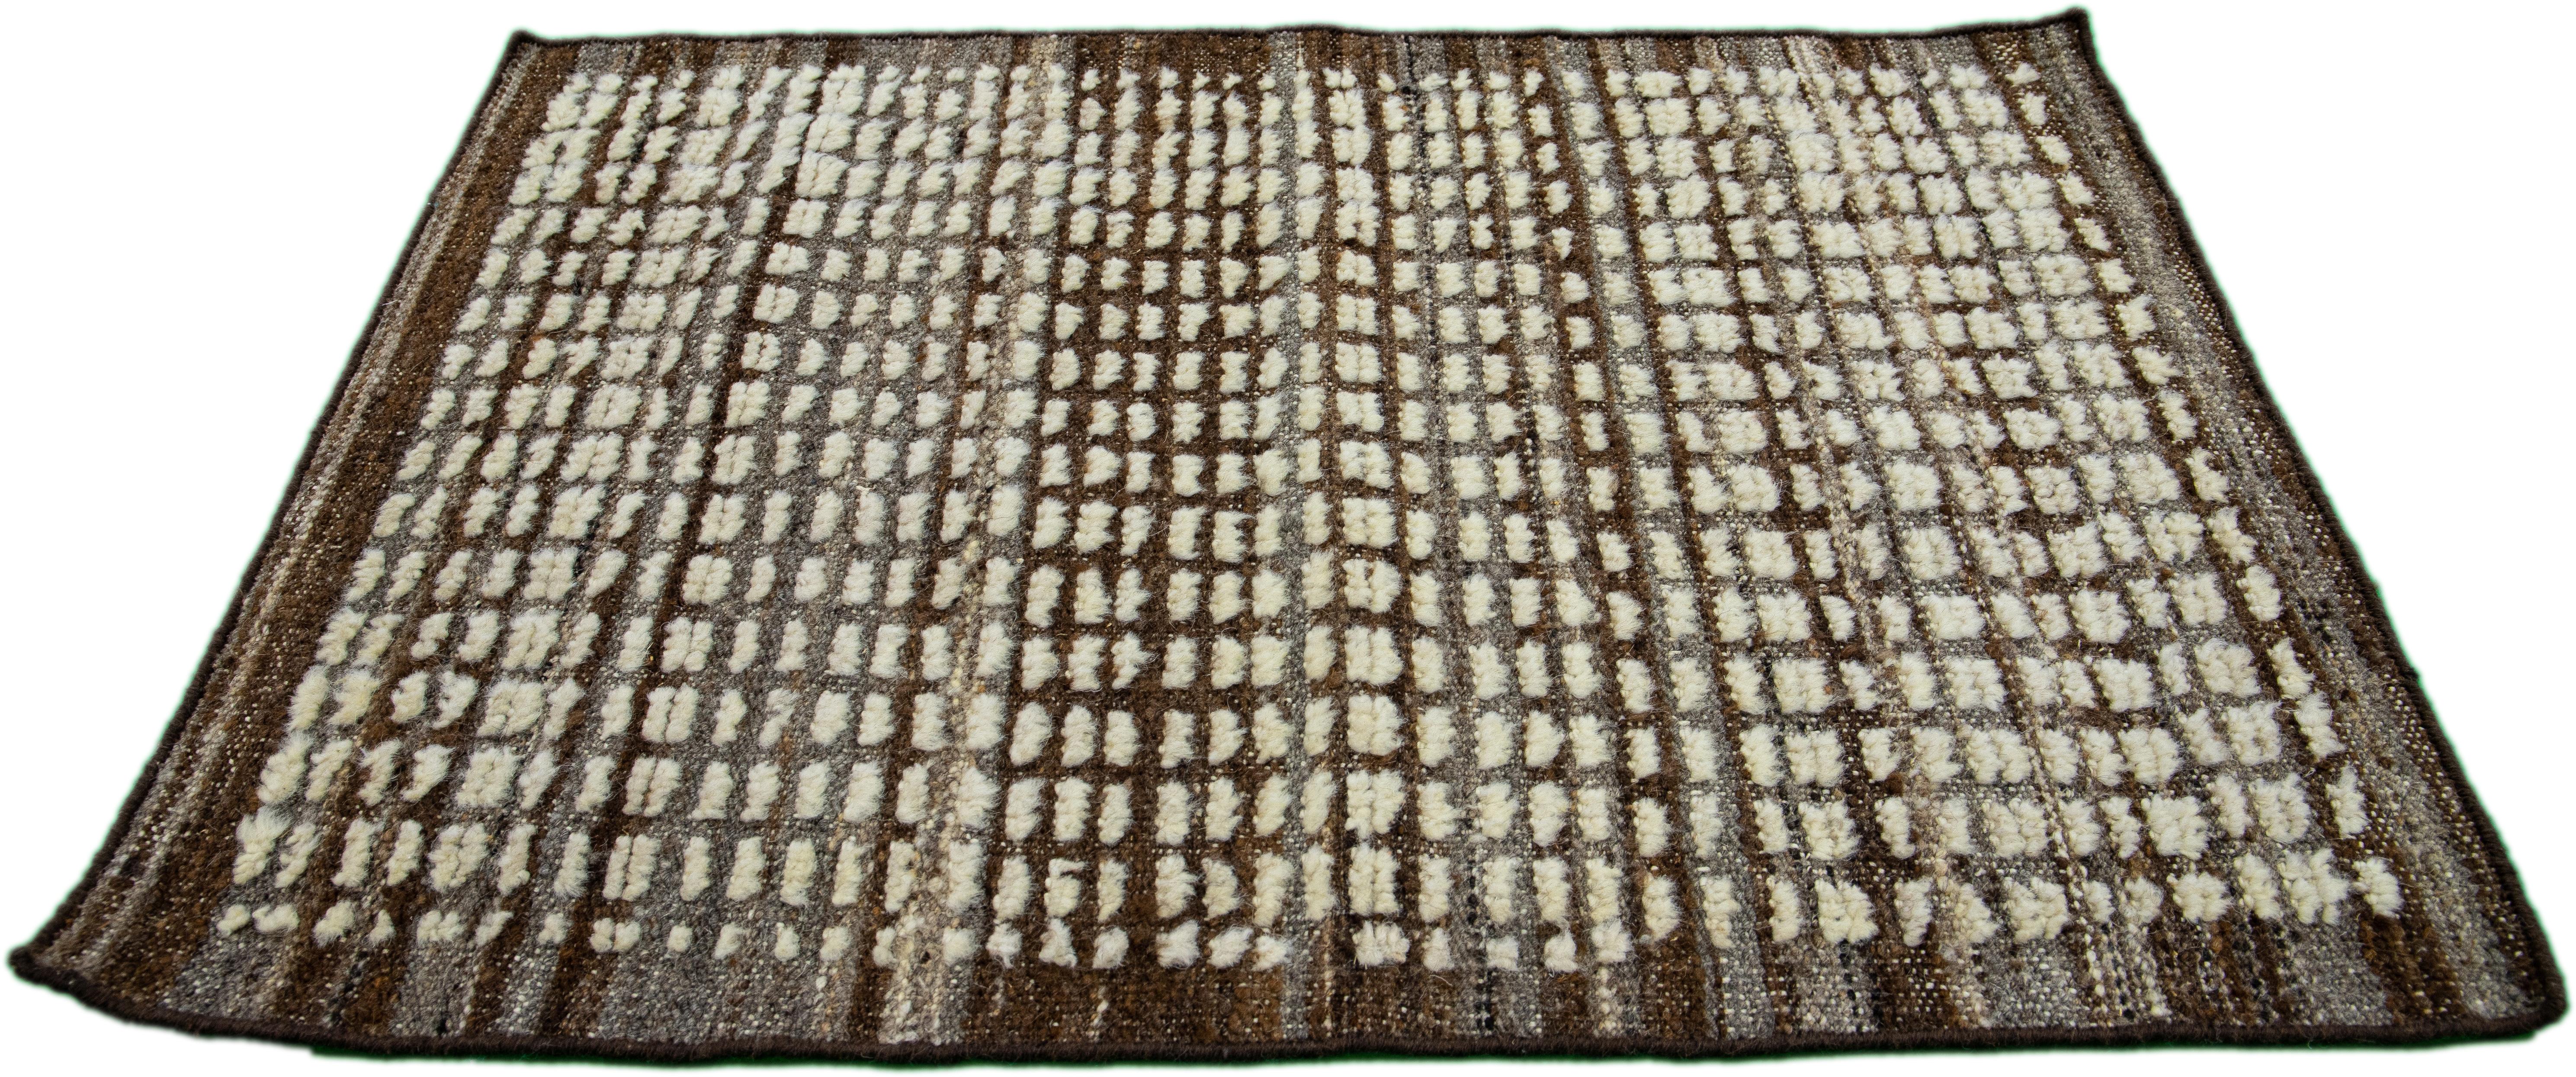 Apadana's Modern Moroccan Style custom wool rug. Custom sizes and colors made-to-order. 

Material: 100% Wool 
Techniques: Hand-knotted
Style: Moroccan 
Lead time: Approx. 15-16 wks available 
Colors: As shown, other custom colors are available.